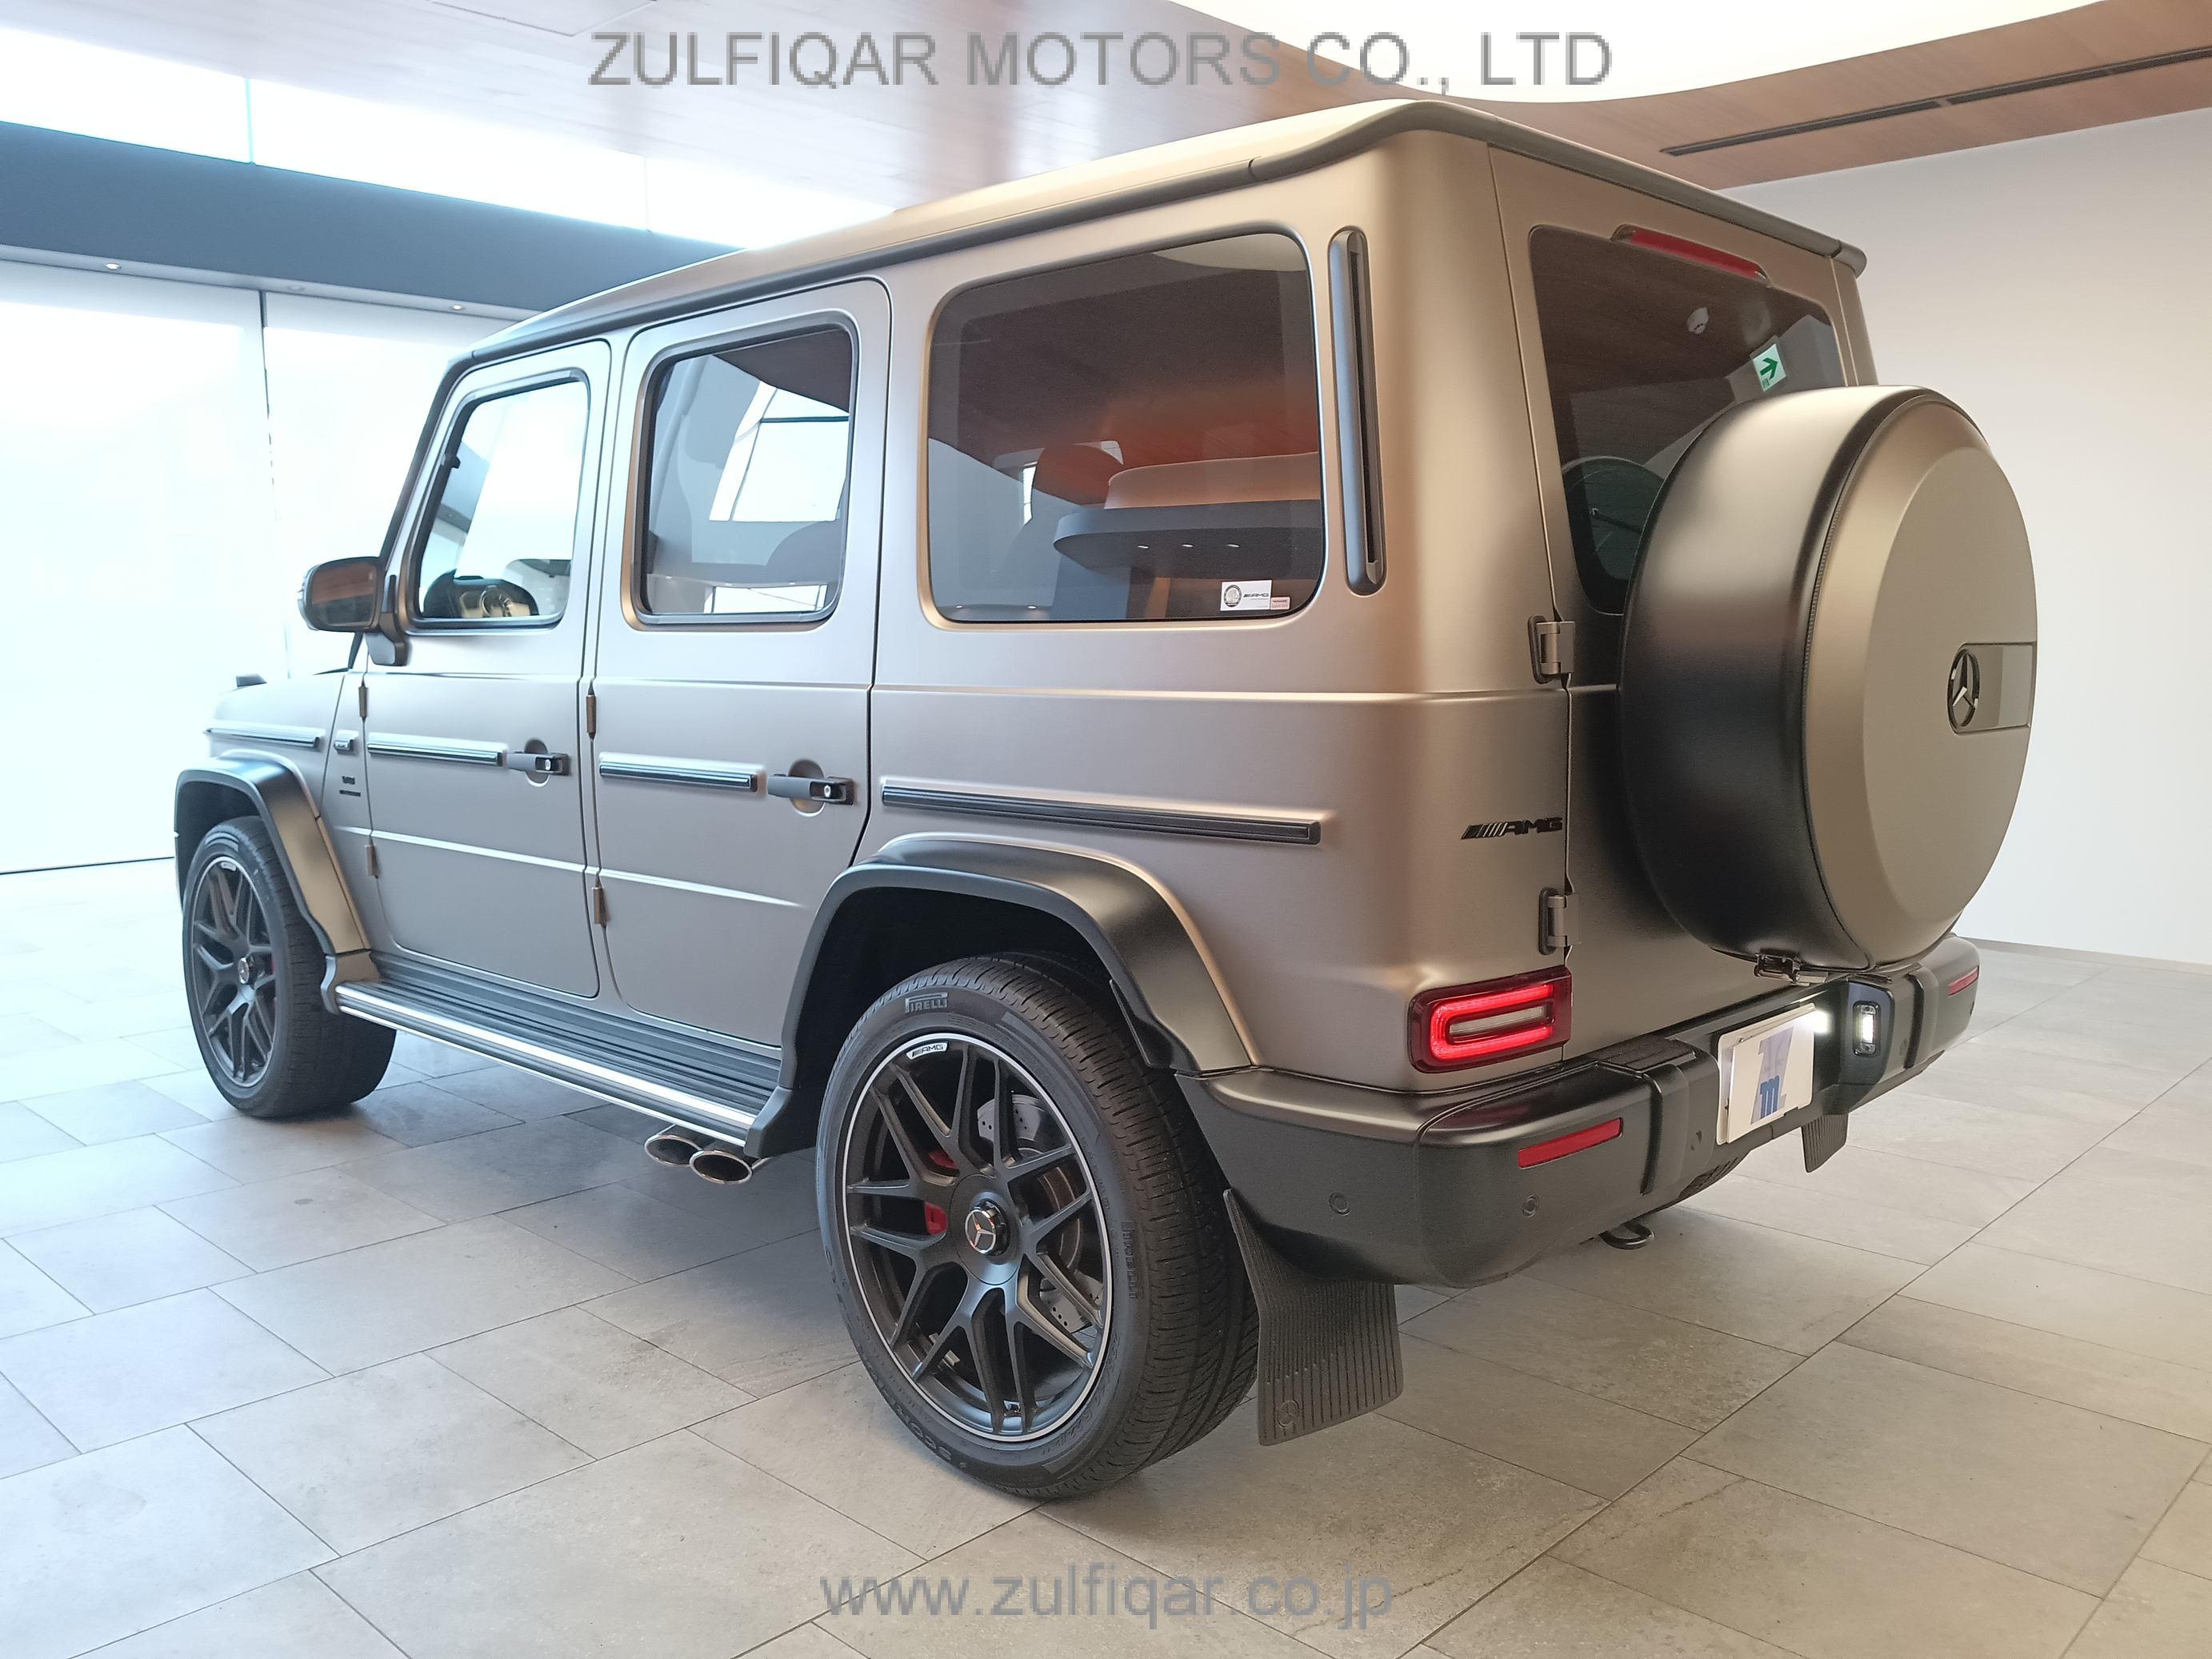 MERCEDES AMG G CLASS 2021 Image 43